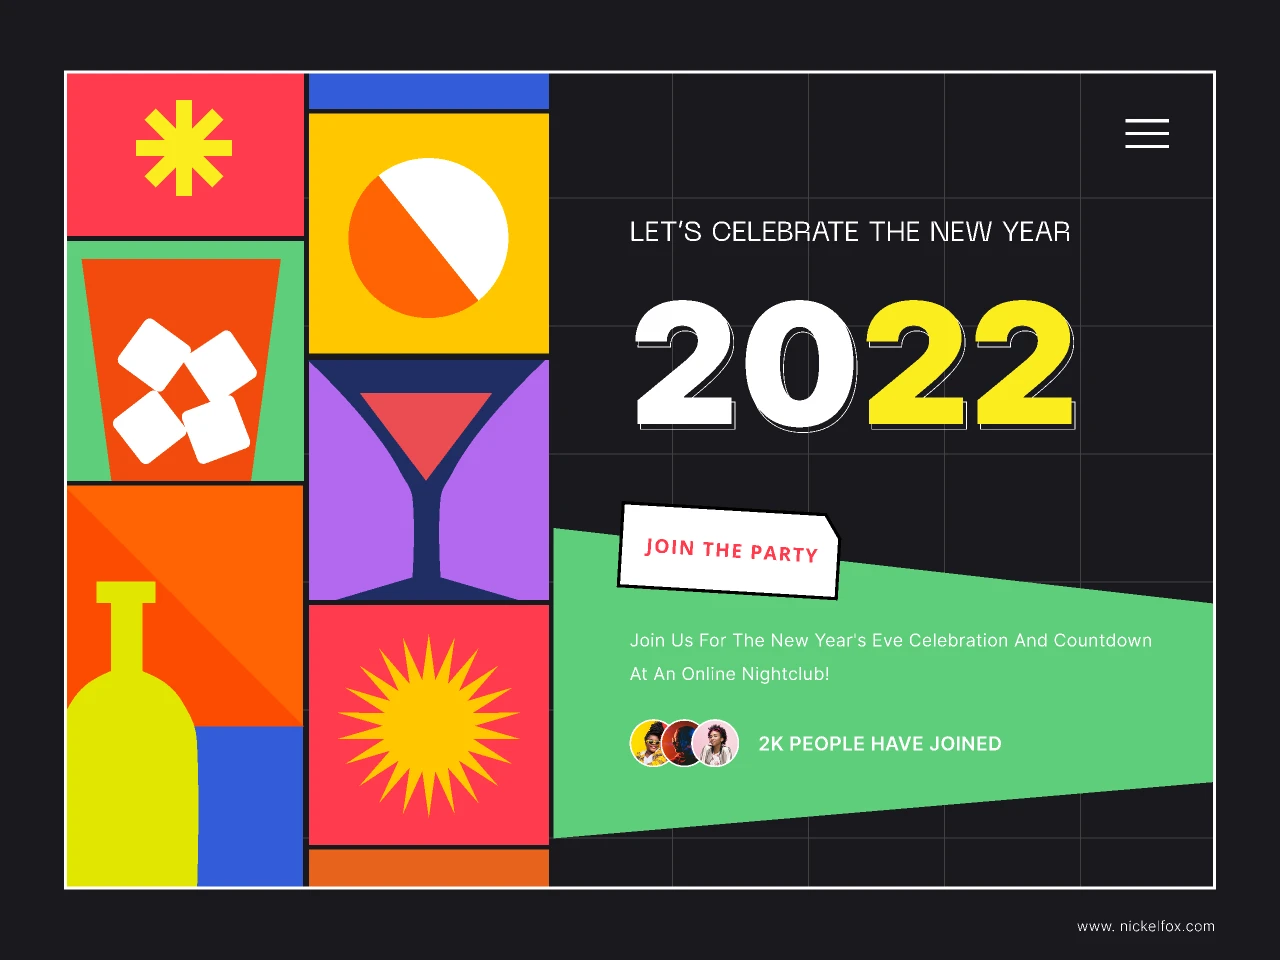 2022 New Year Virtual Party for Figma and Adobe XD